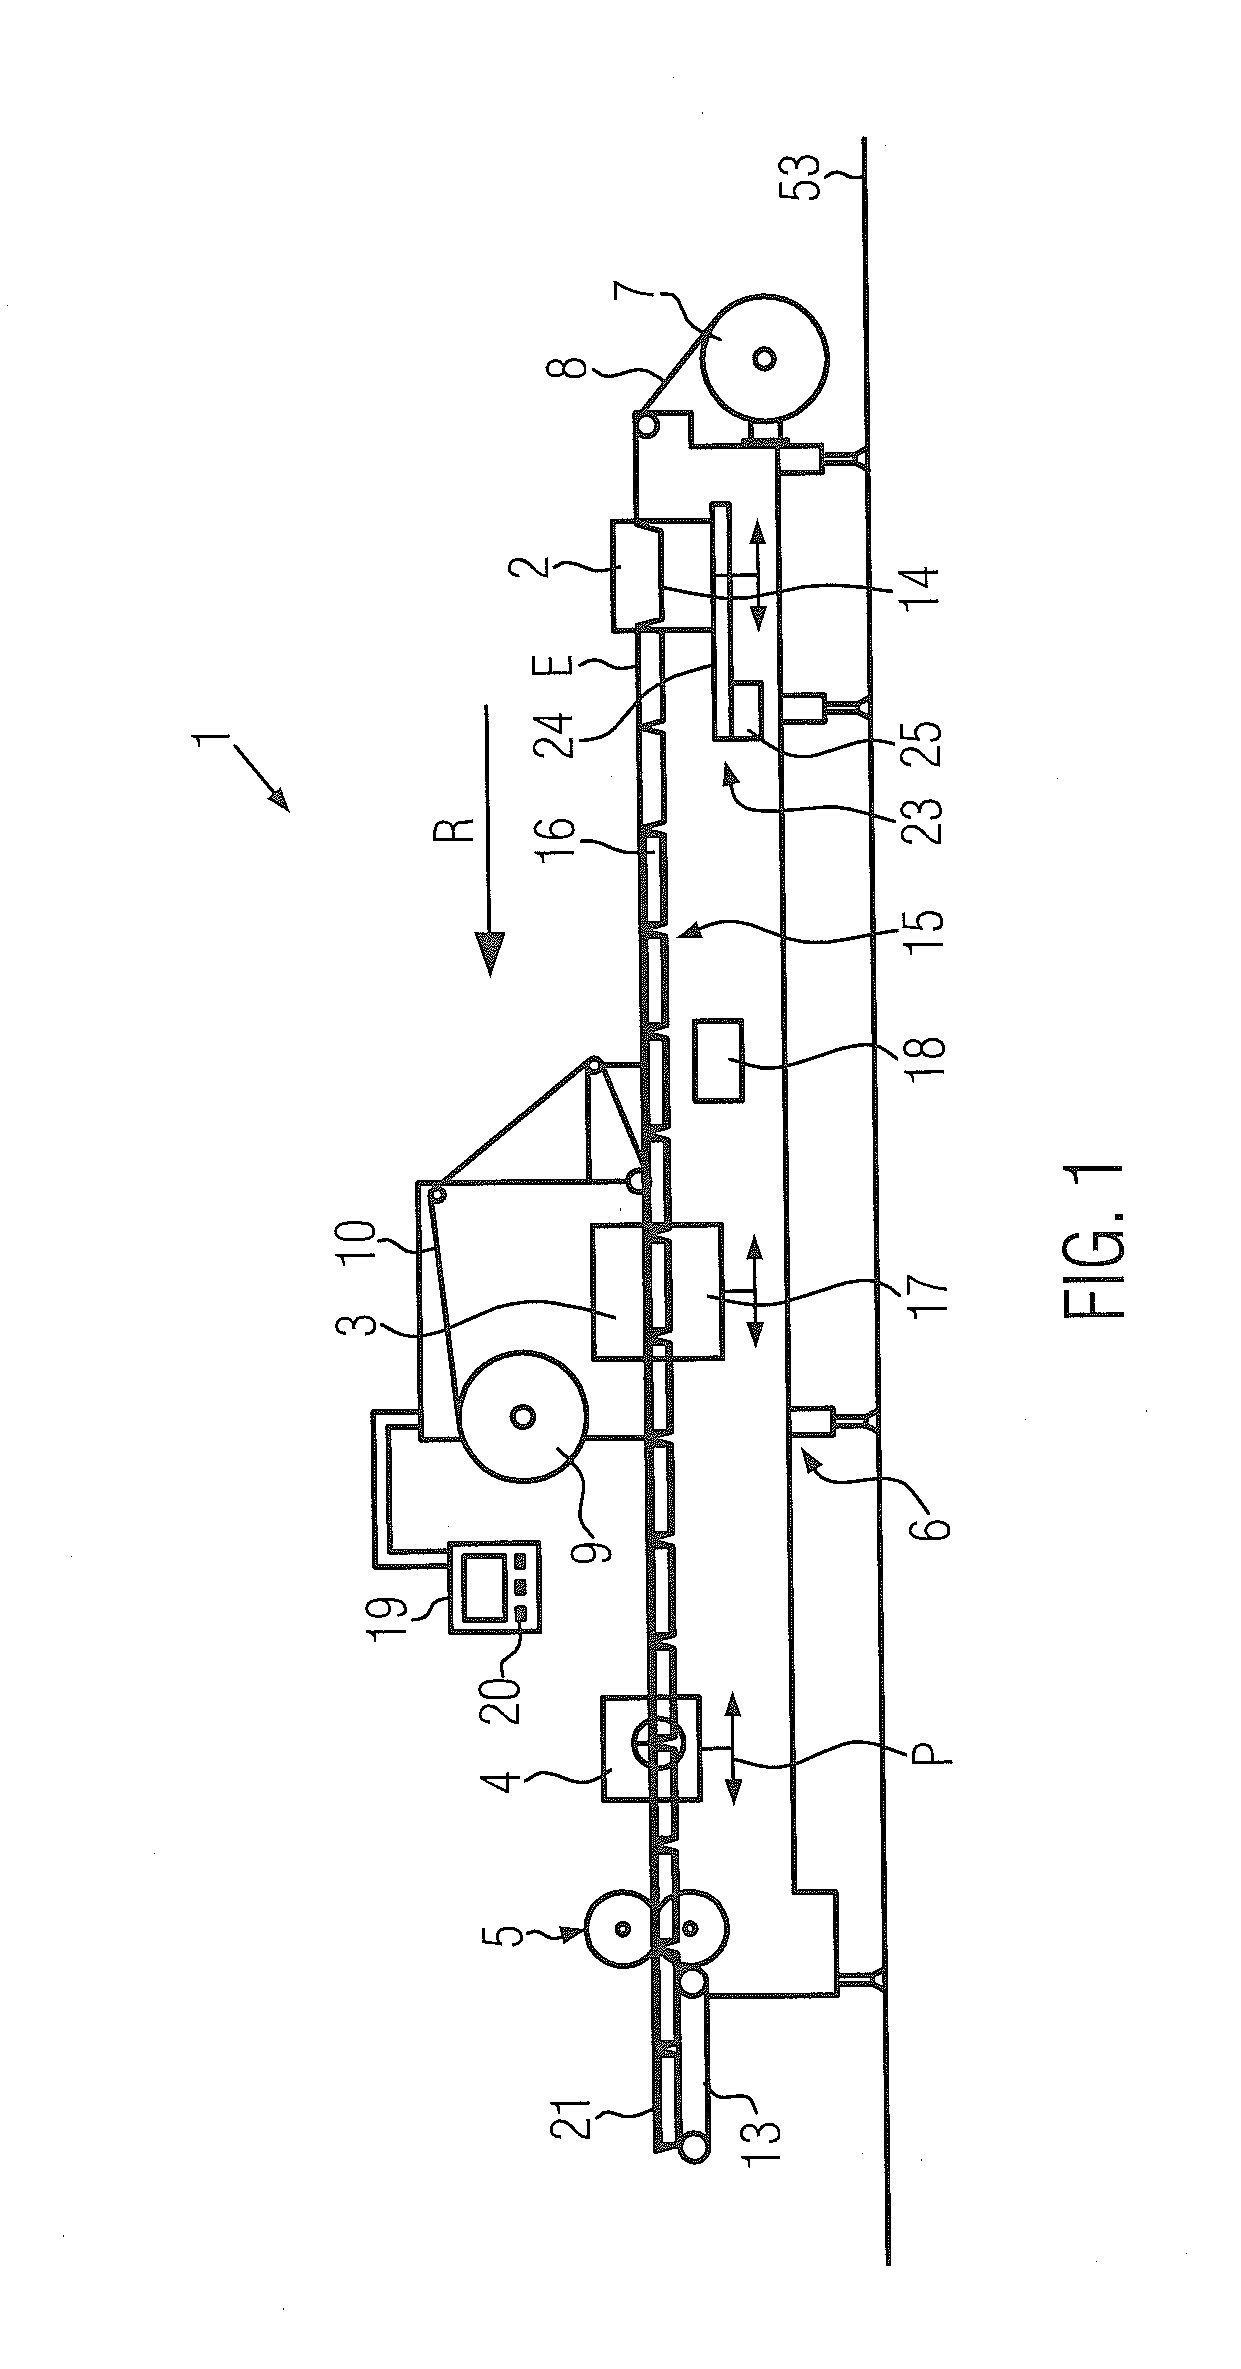 Work station for a packaging machine and tool changing method